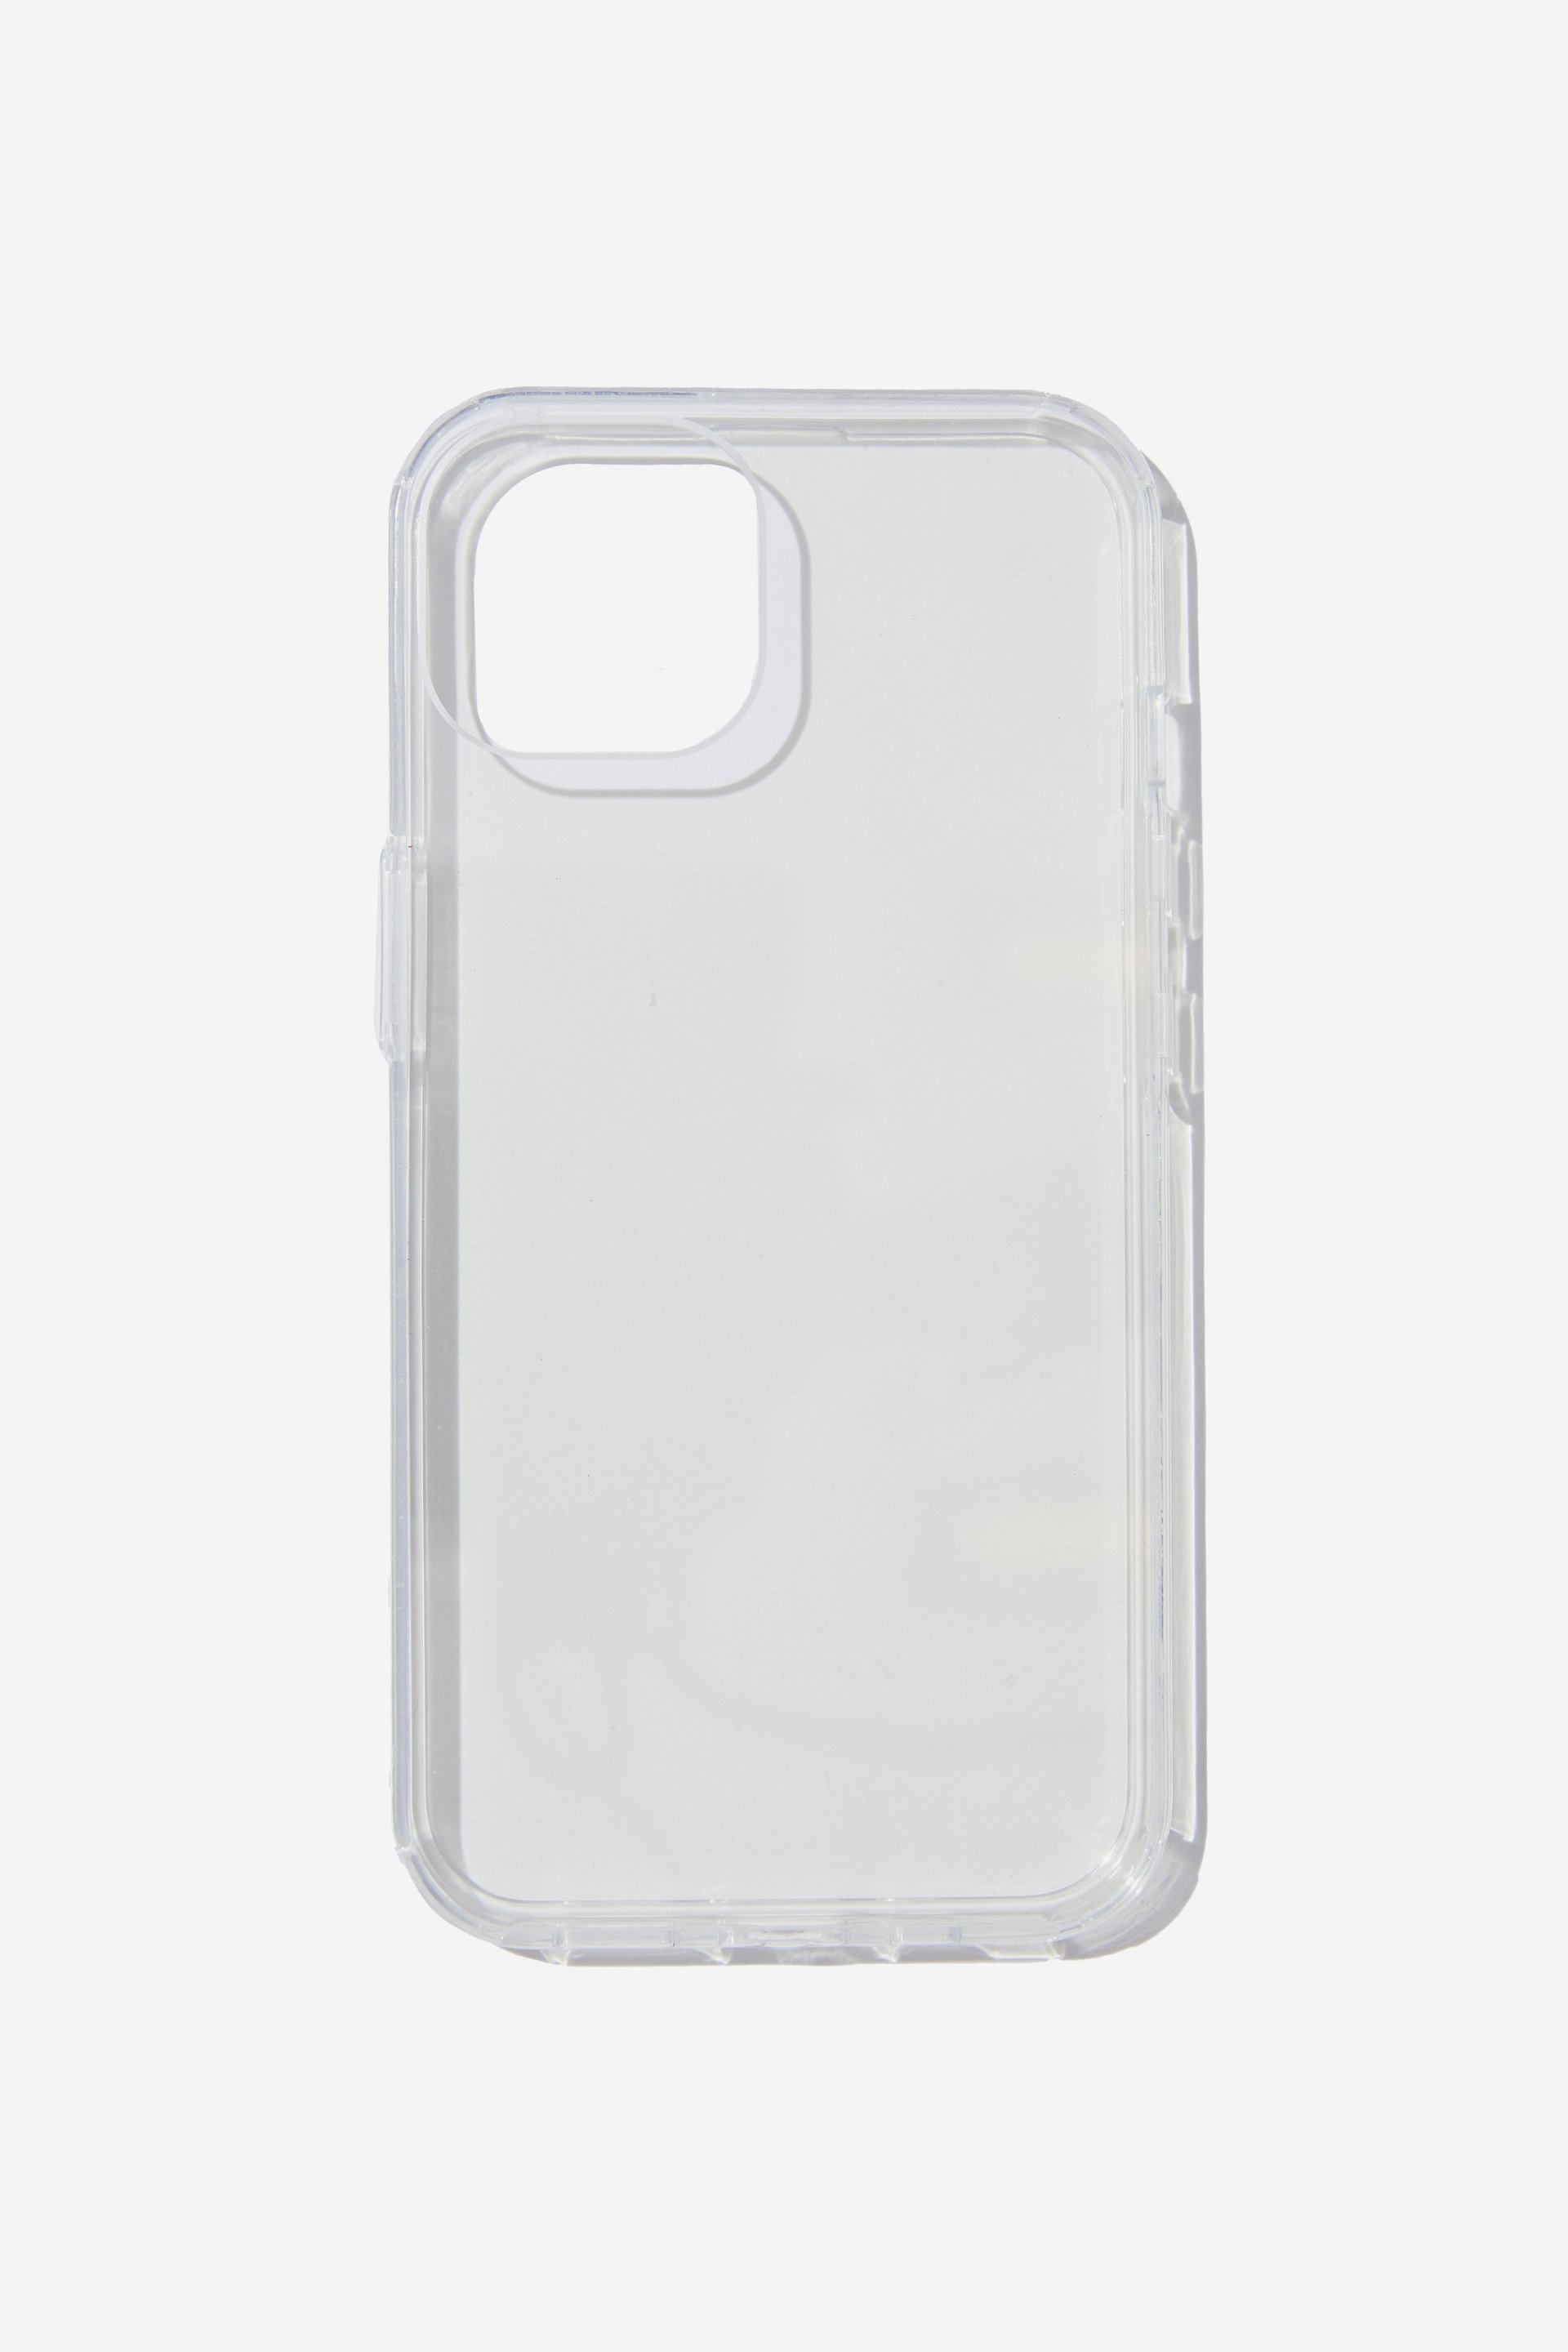 Typo - Snap On Protective Phone Case Iphone 13 - Clear glass